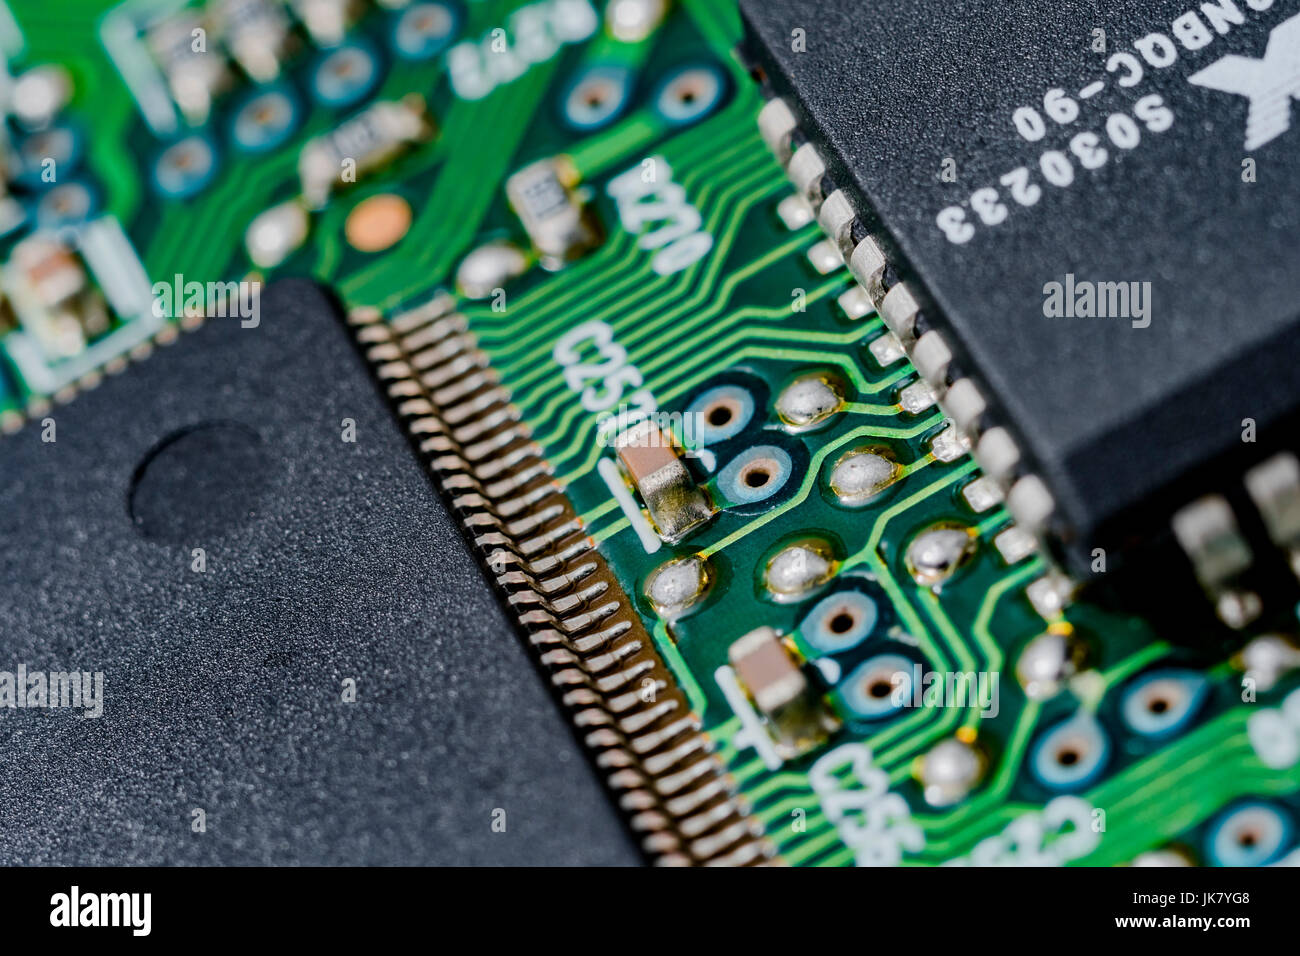 Edge pinout connectors of two integrated circuit (IC) components on a circuit board. Interconnected concept. Wiring inside computer, circuit close up Stock Photo